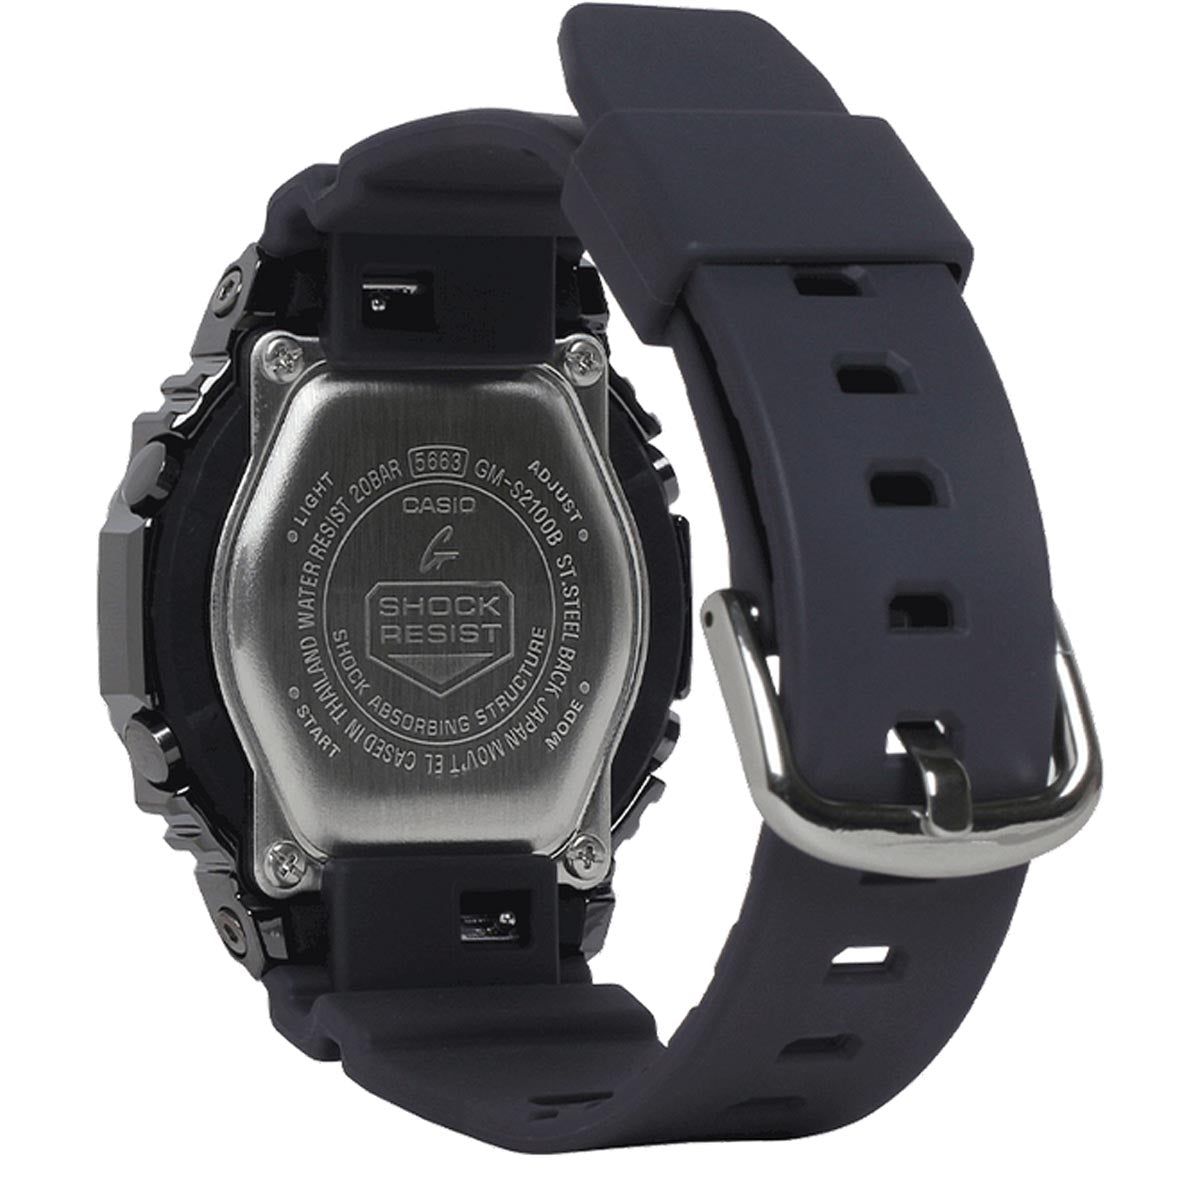 G Shock 2100 Series Watch with Black Stainless Steel Dial and Black Resin Strap  (quartz movement)